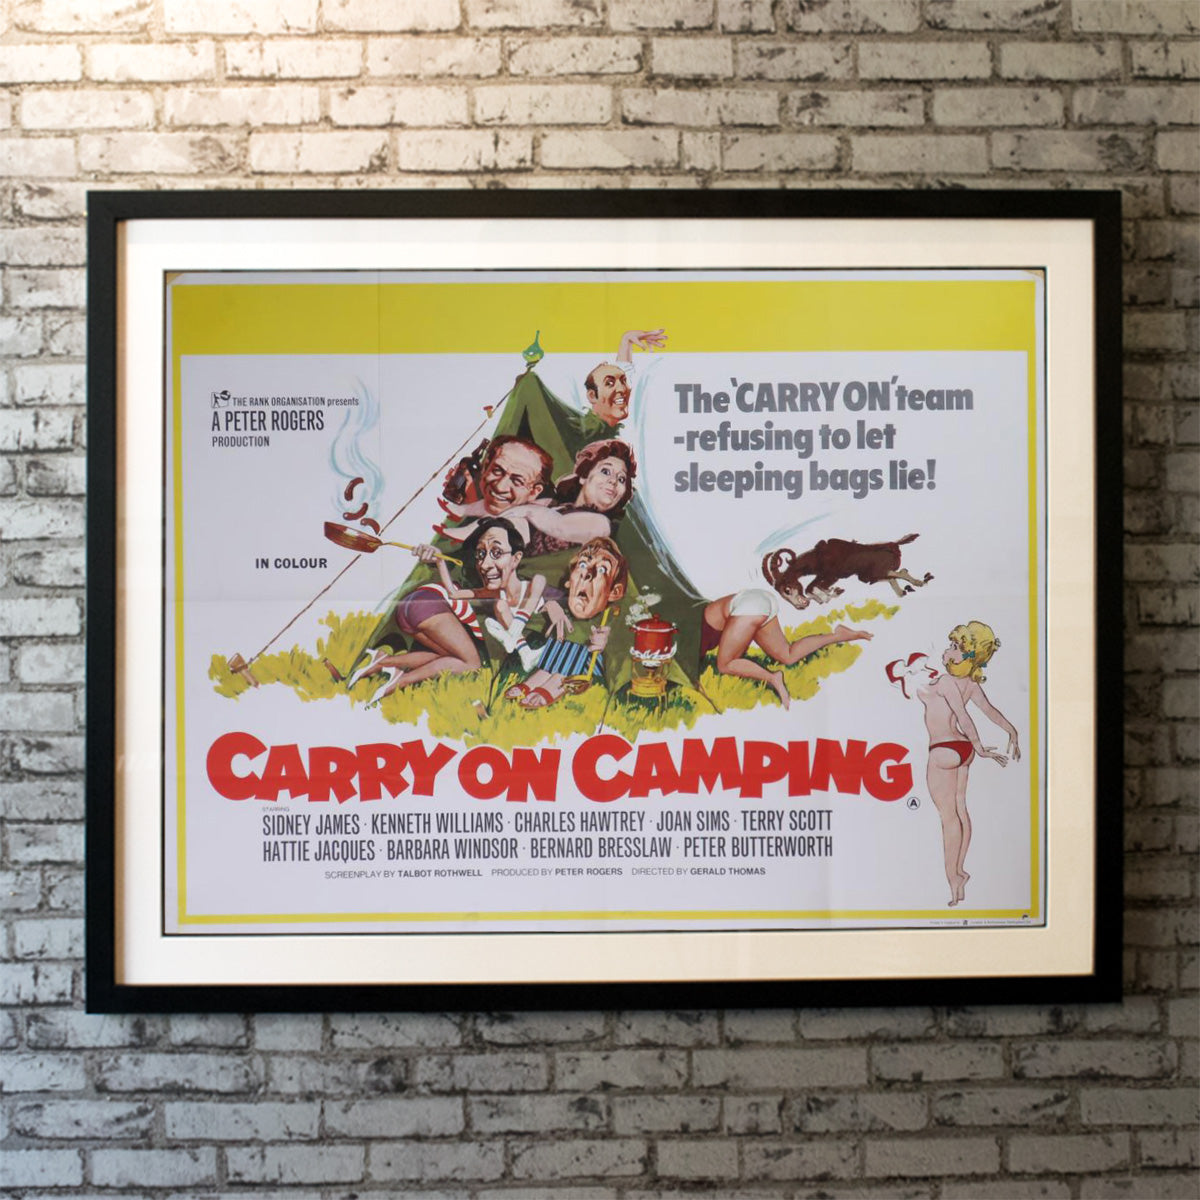 Original Movie Poster of Carry On Camping (1969)